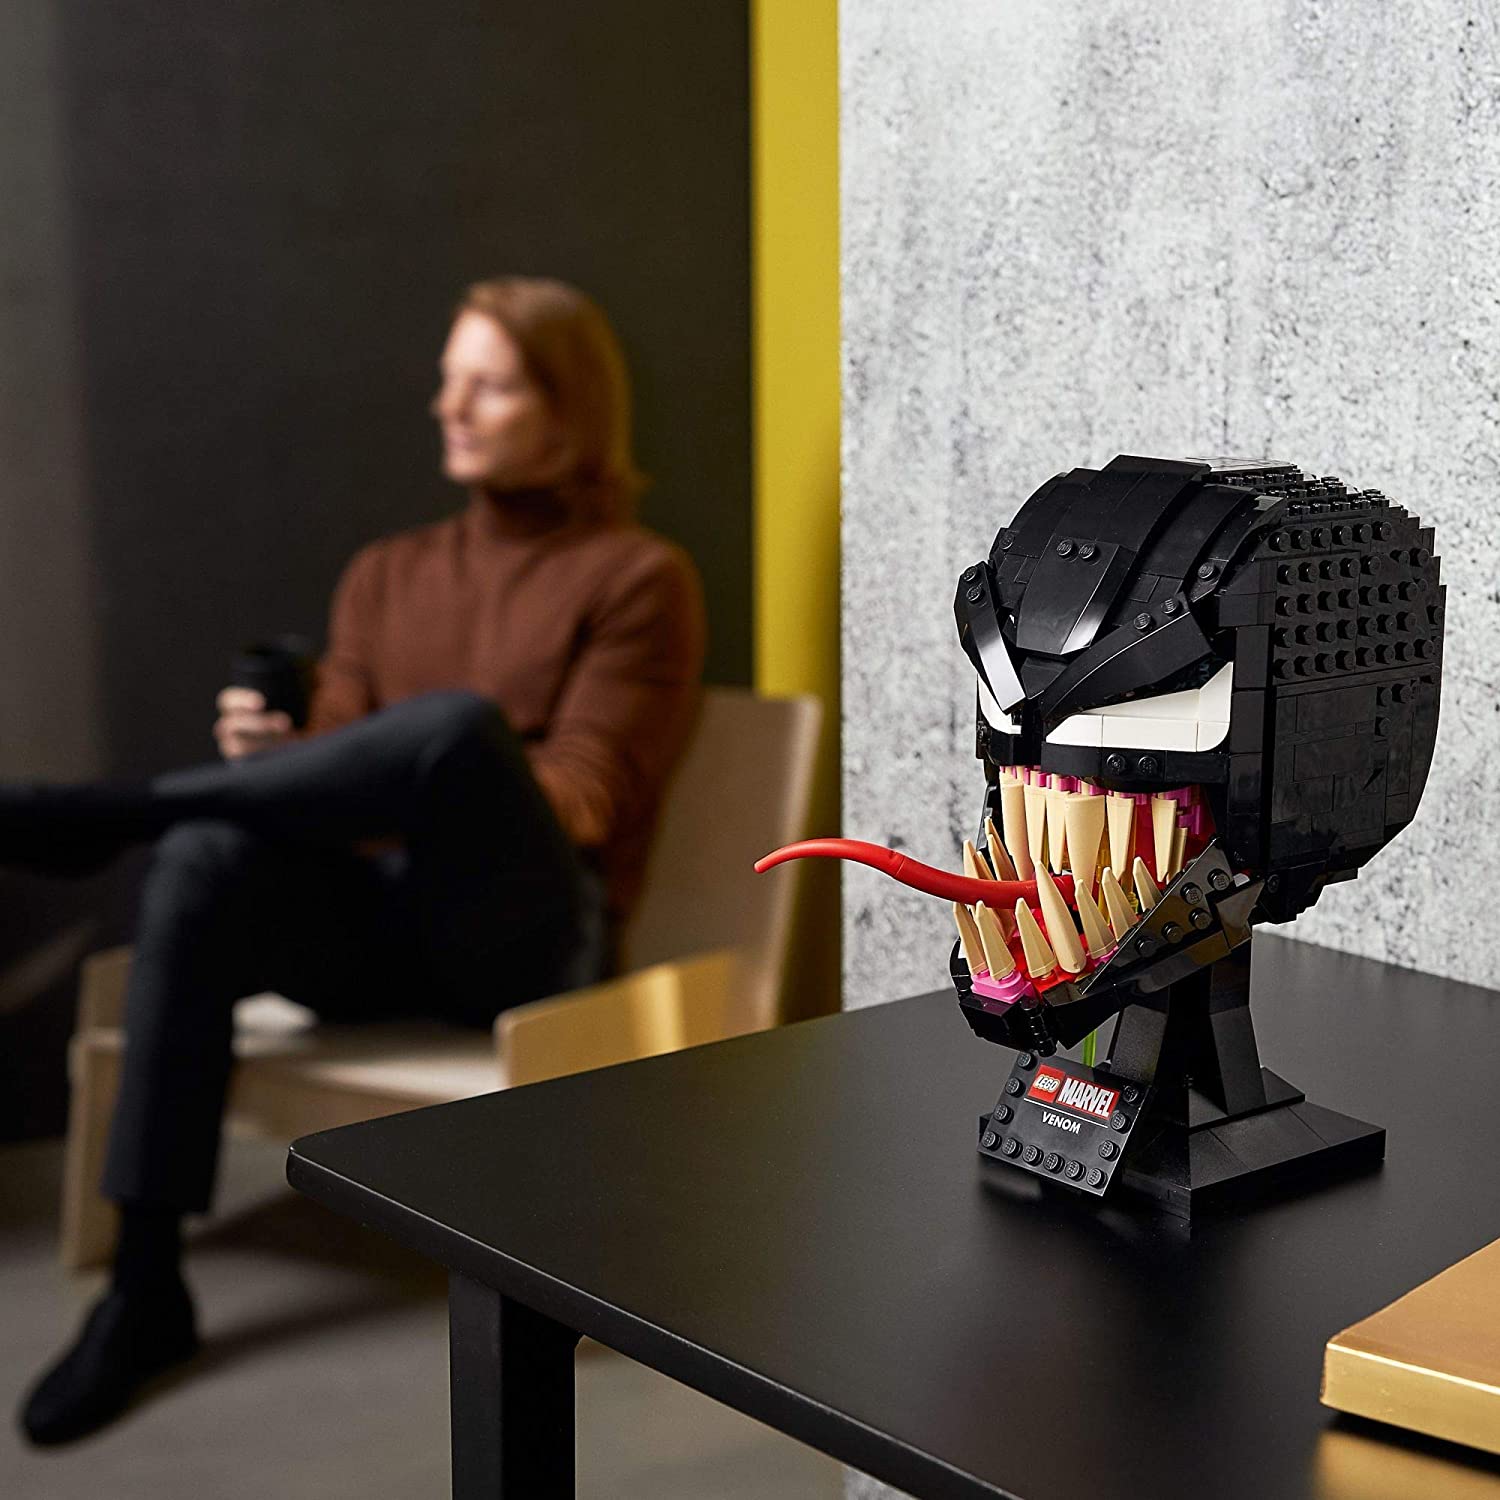 A fully completed model of Venom made from Lego sitting on a black table. In the background a person is sitting in a chair with a cup of coffee.